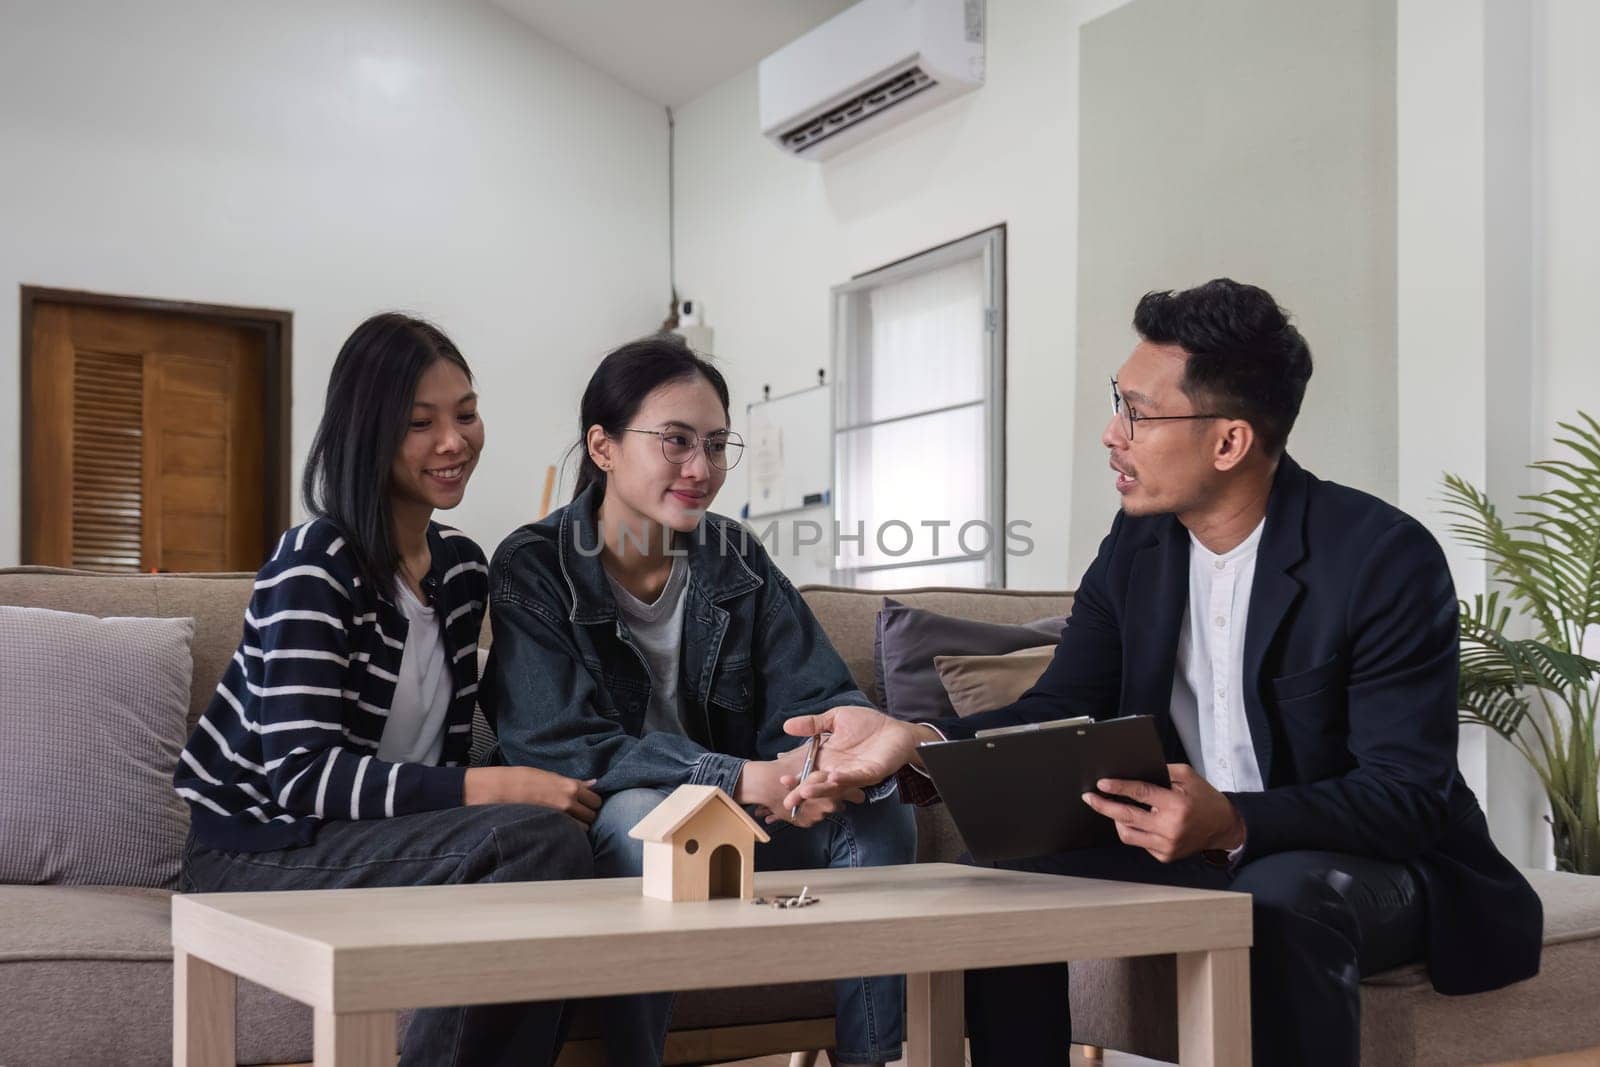 Real estate agents present and advise clients on the decision to sign a home purchase agreement form. Offering mortgage loans and home insurance.